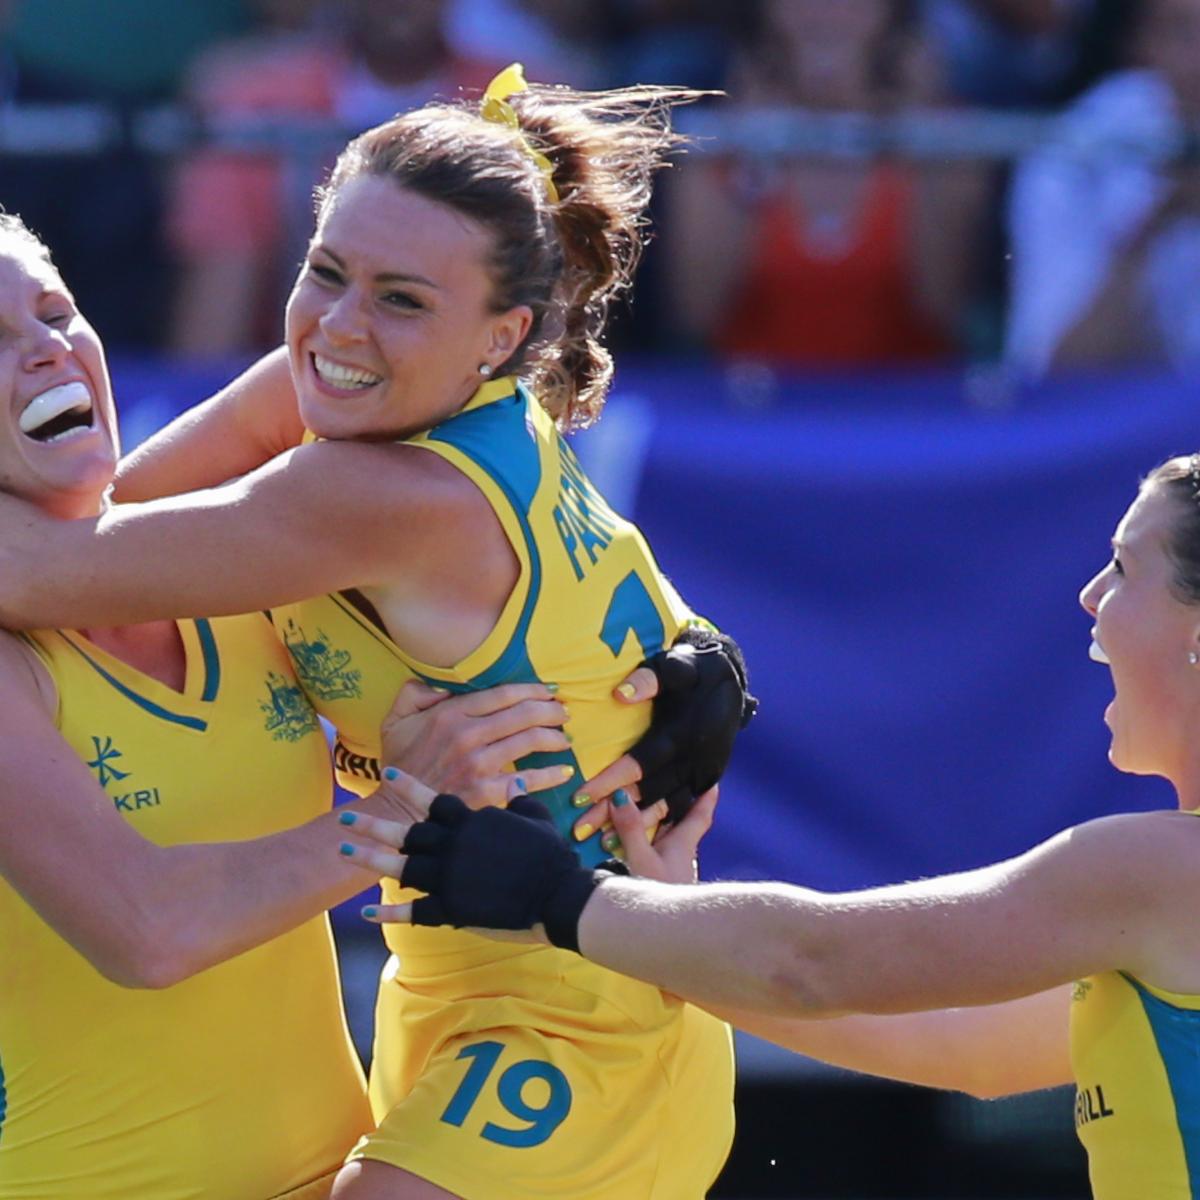 Women's Hockey World Cup Final 2014 Date, Start Time, Live Stream and